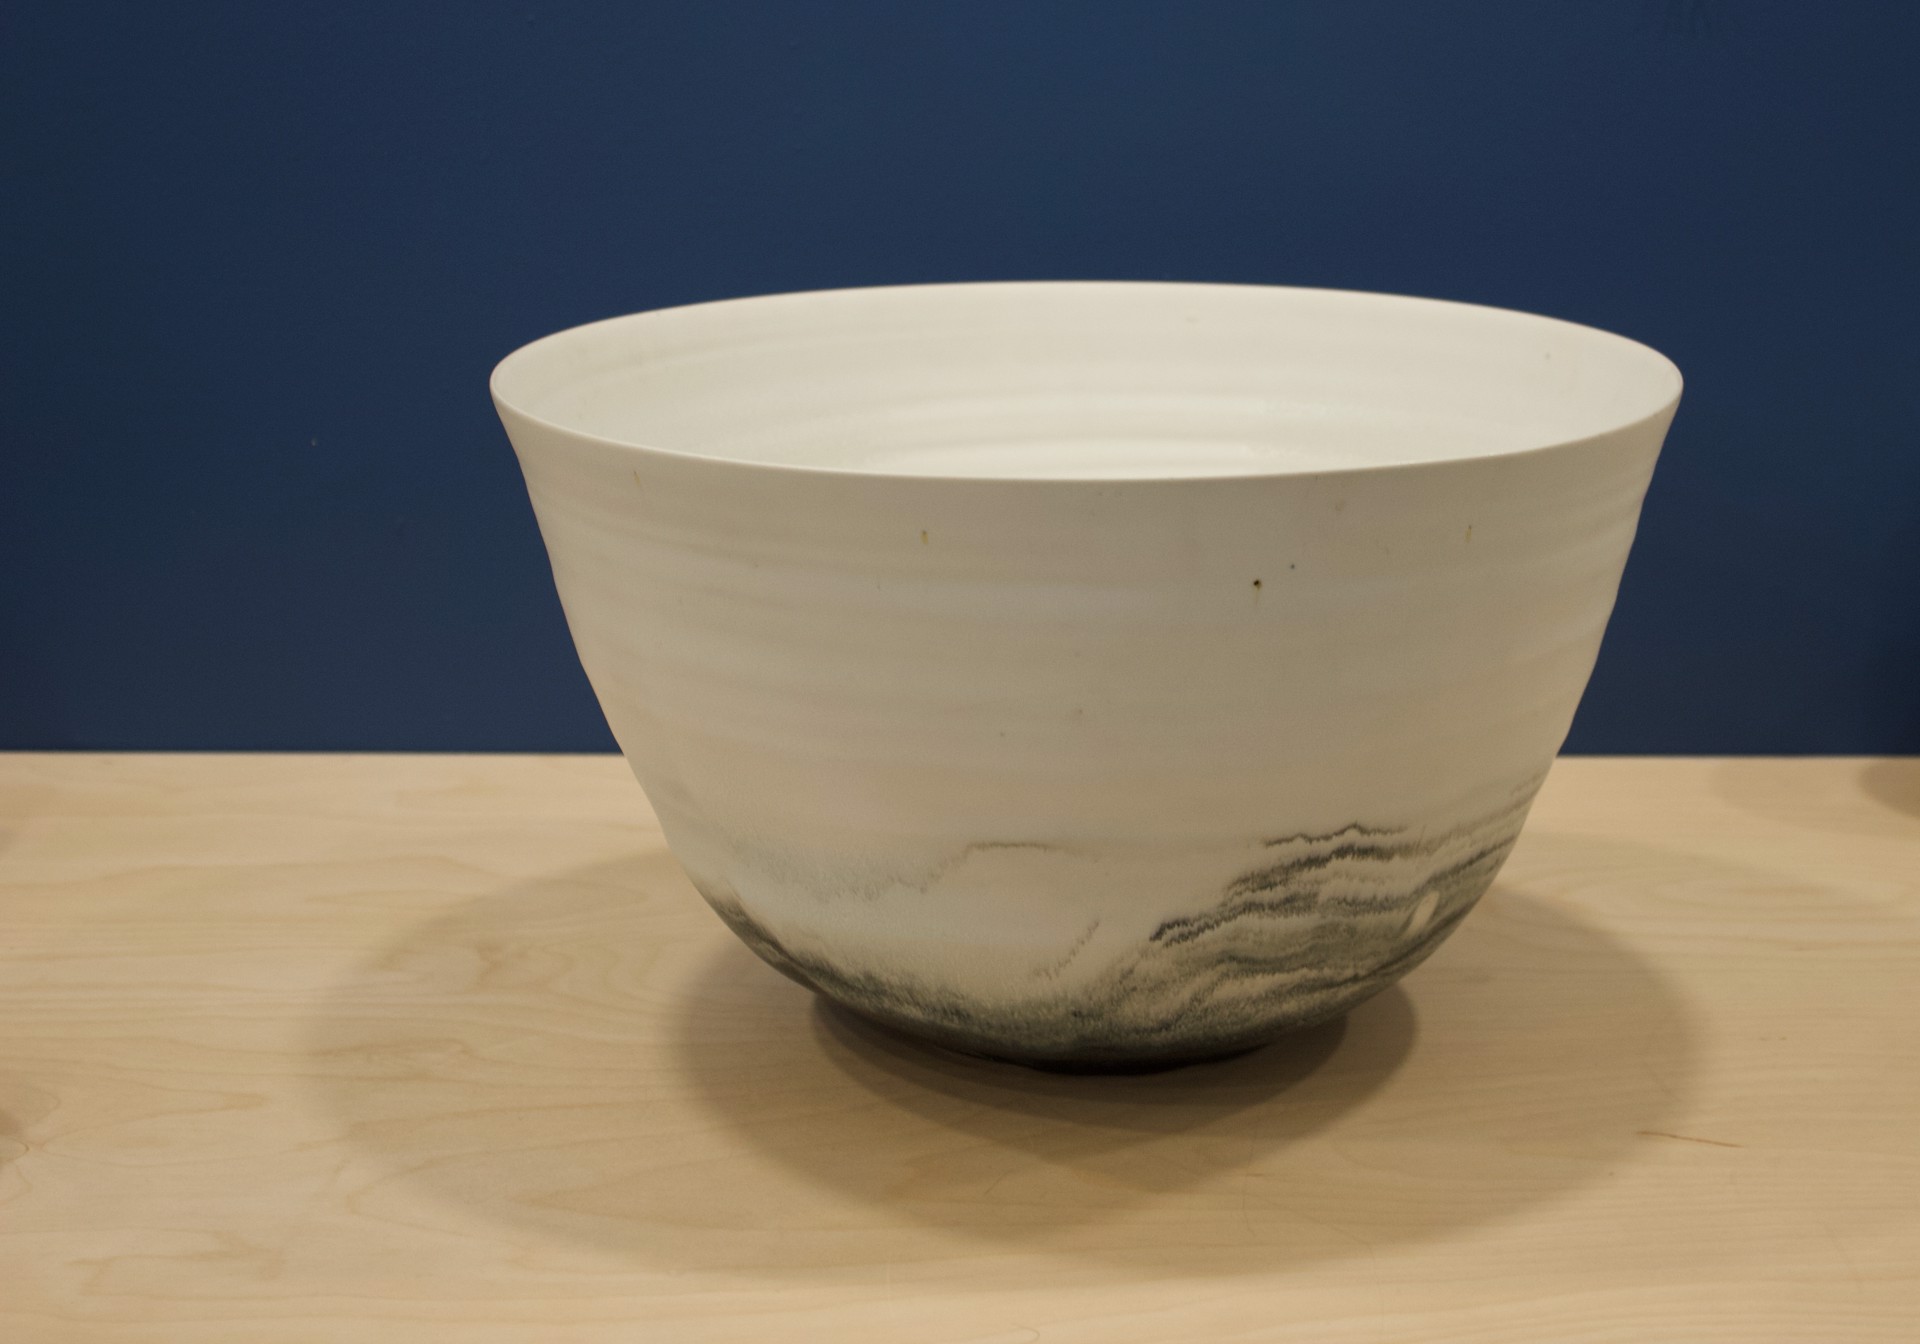 Large Charcoal Bottom Bowl by Kyra Cane